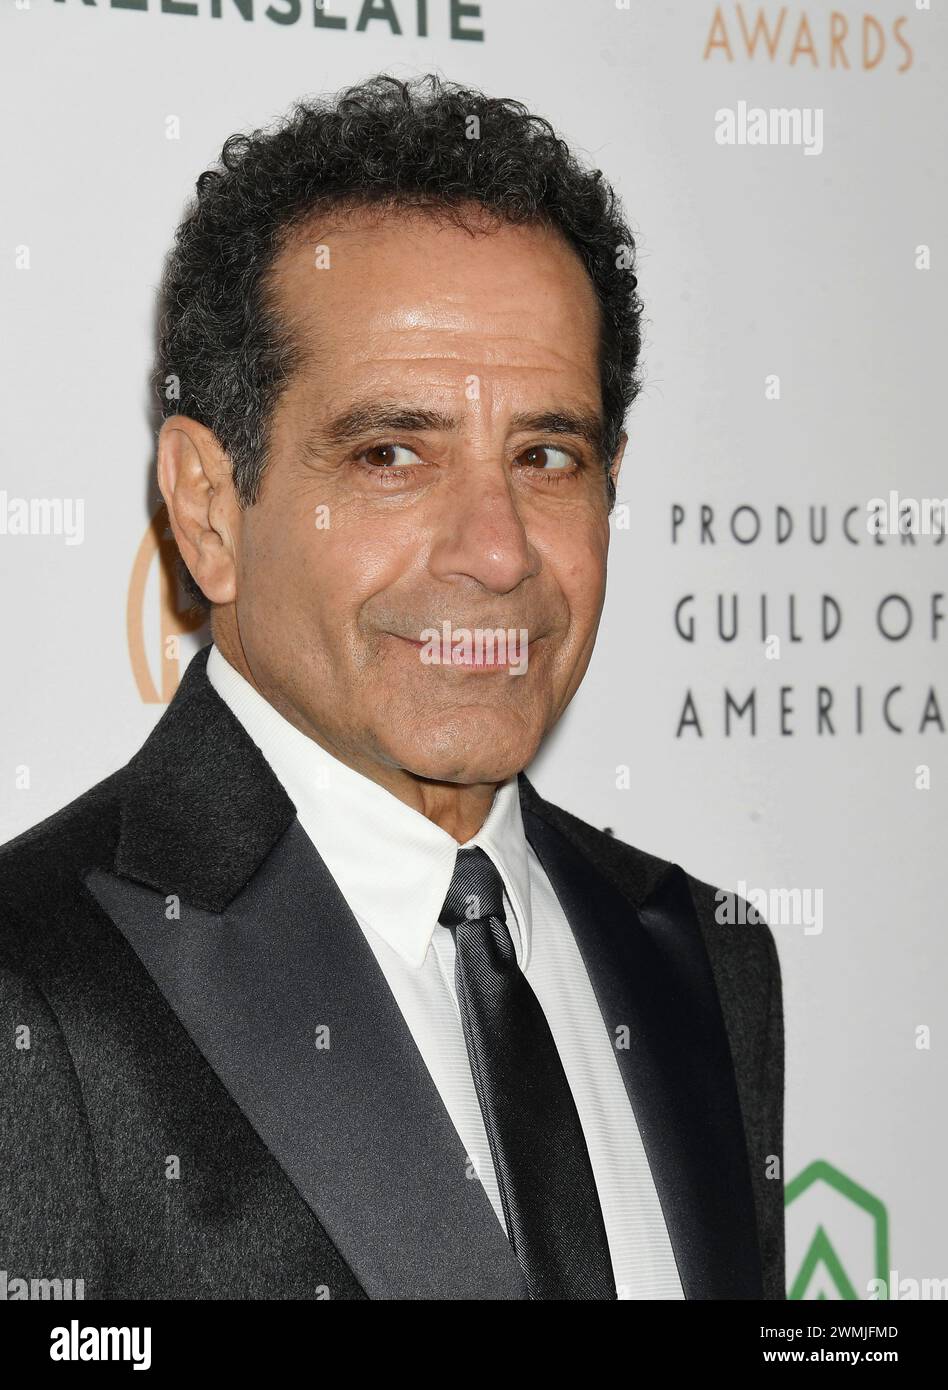 Hollywood, California, USA. 25th Feb, 2024. Tony Shalhoub attends the 35th Annual Producers Guild Awards at The Ray Dolby Ballroom on February 25, 2024 in Hollywood, California. Credit: Jeffrey Mayer/Jtm Photos/Media Punch/Alamy Live News Stock Photo